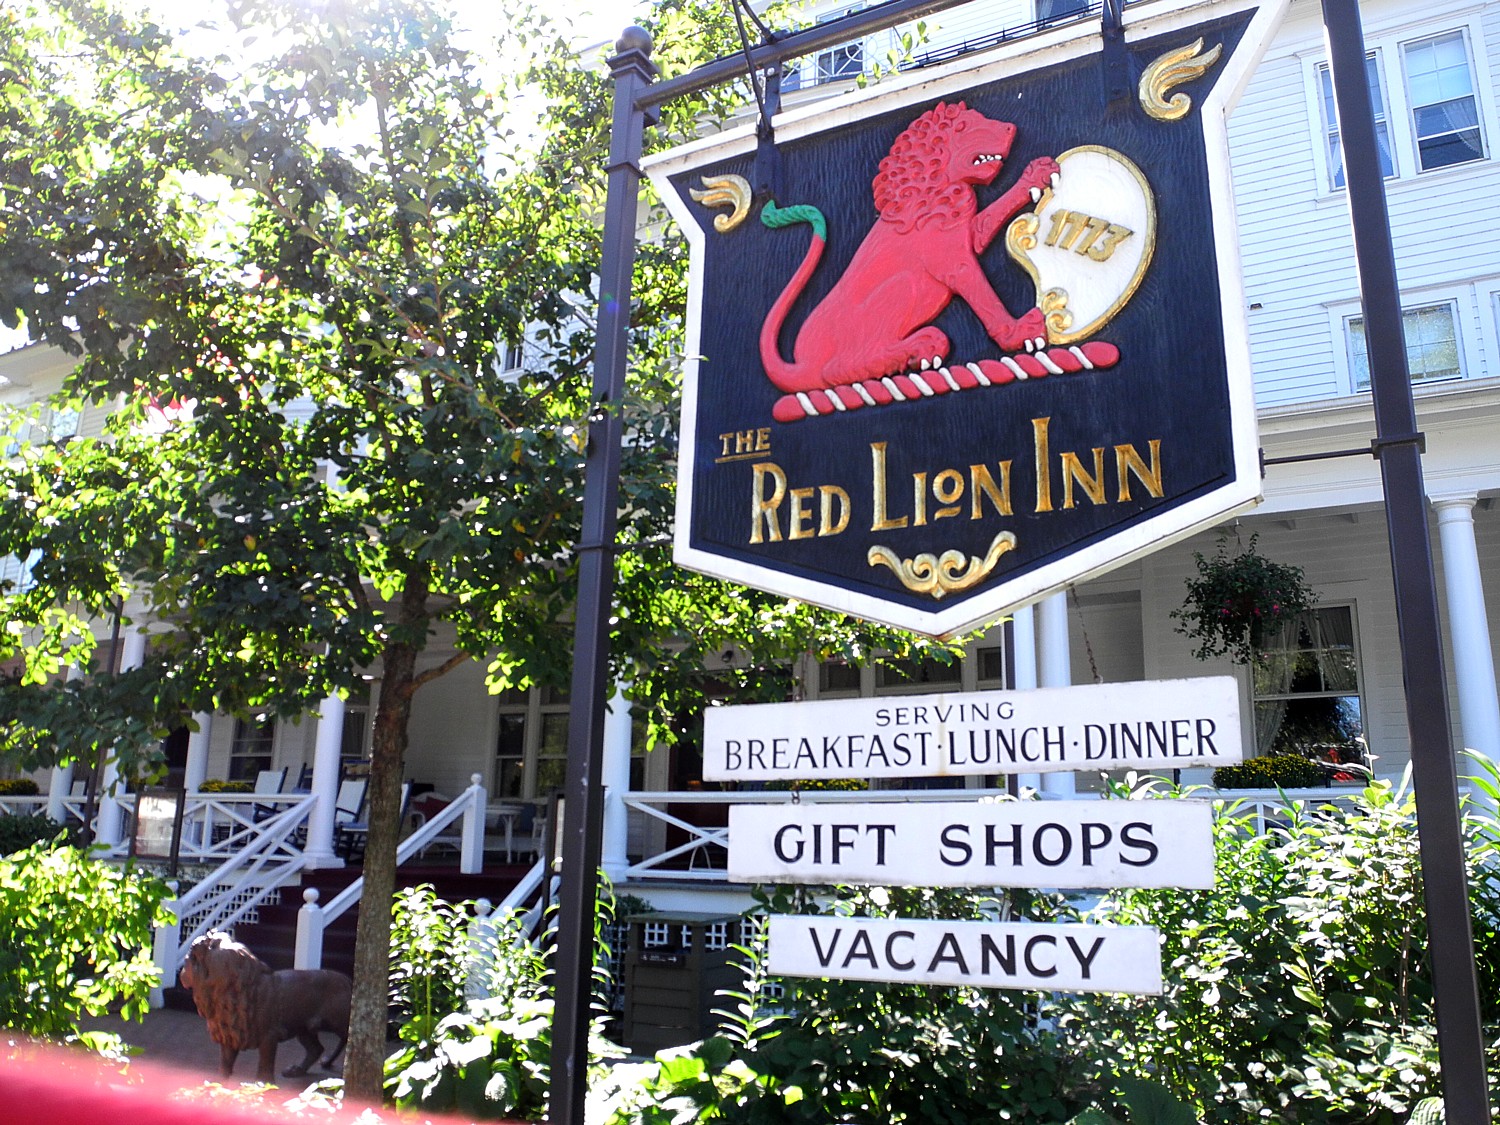 The historic Red Lion Inn, Stockbridge, MA, immortalized in Norman Rockwell's painting © 2016 Karen Rubin/news-photos-features.com